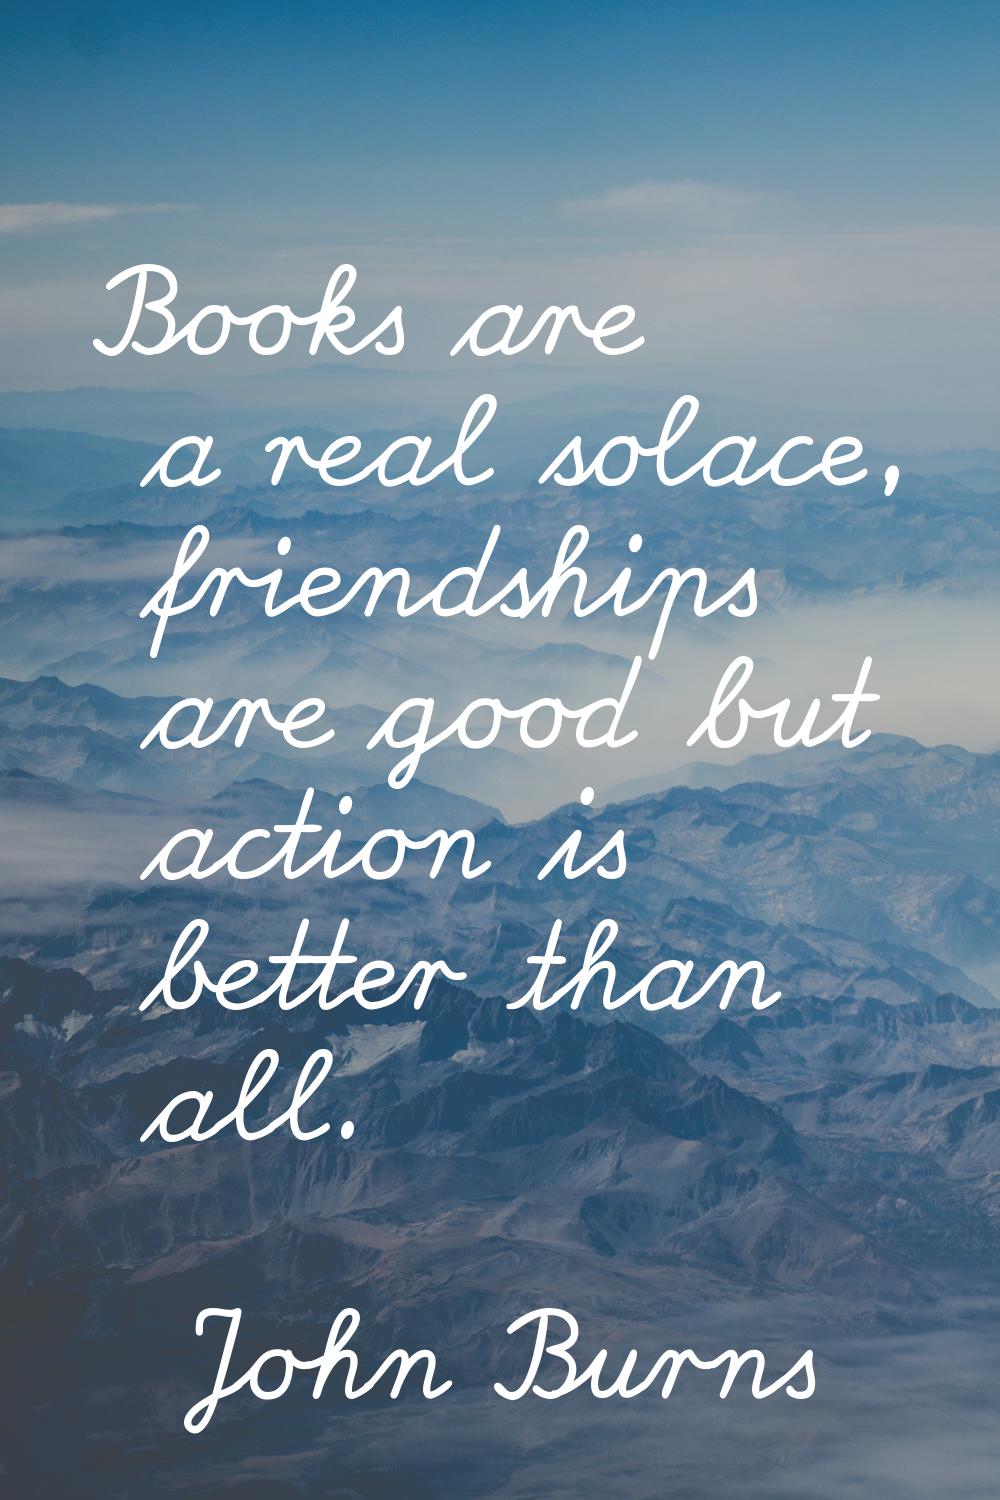 Books are a real solace, friendships are good but action is better than all.